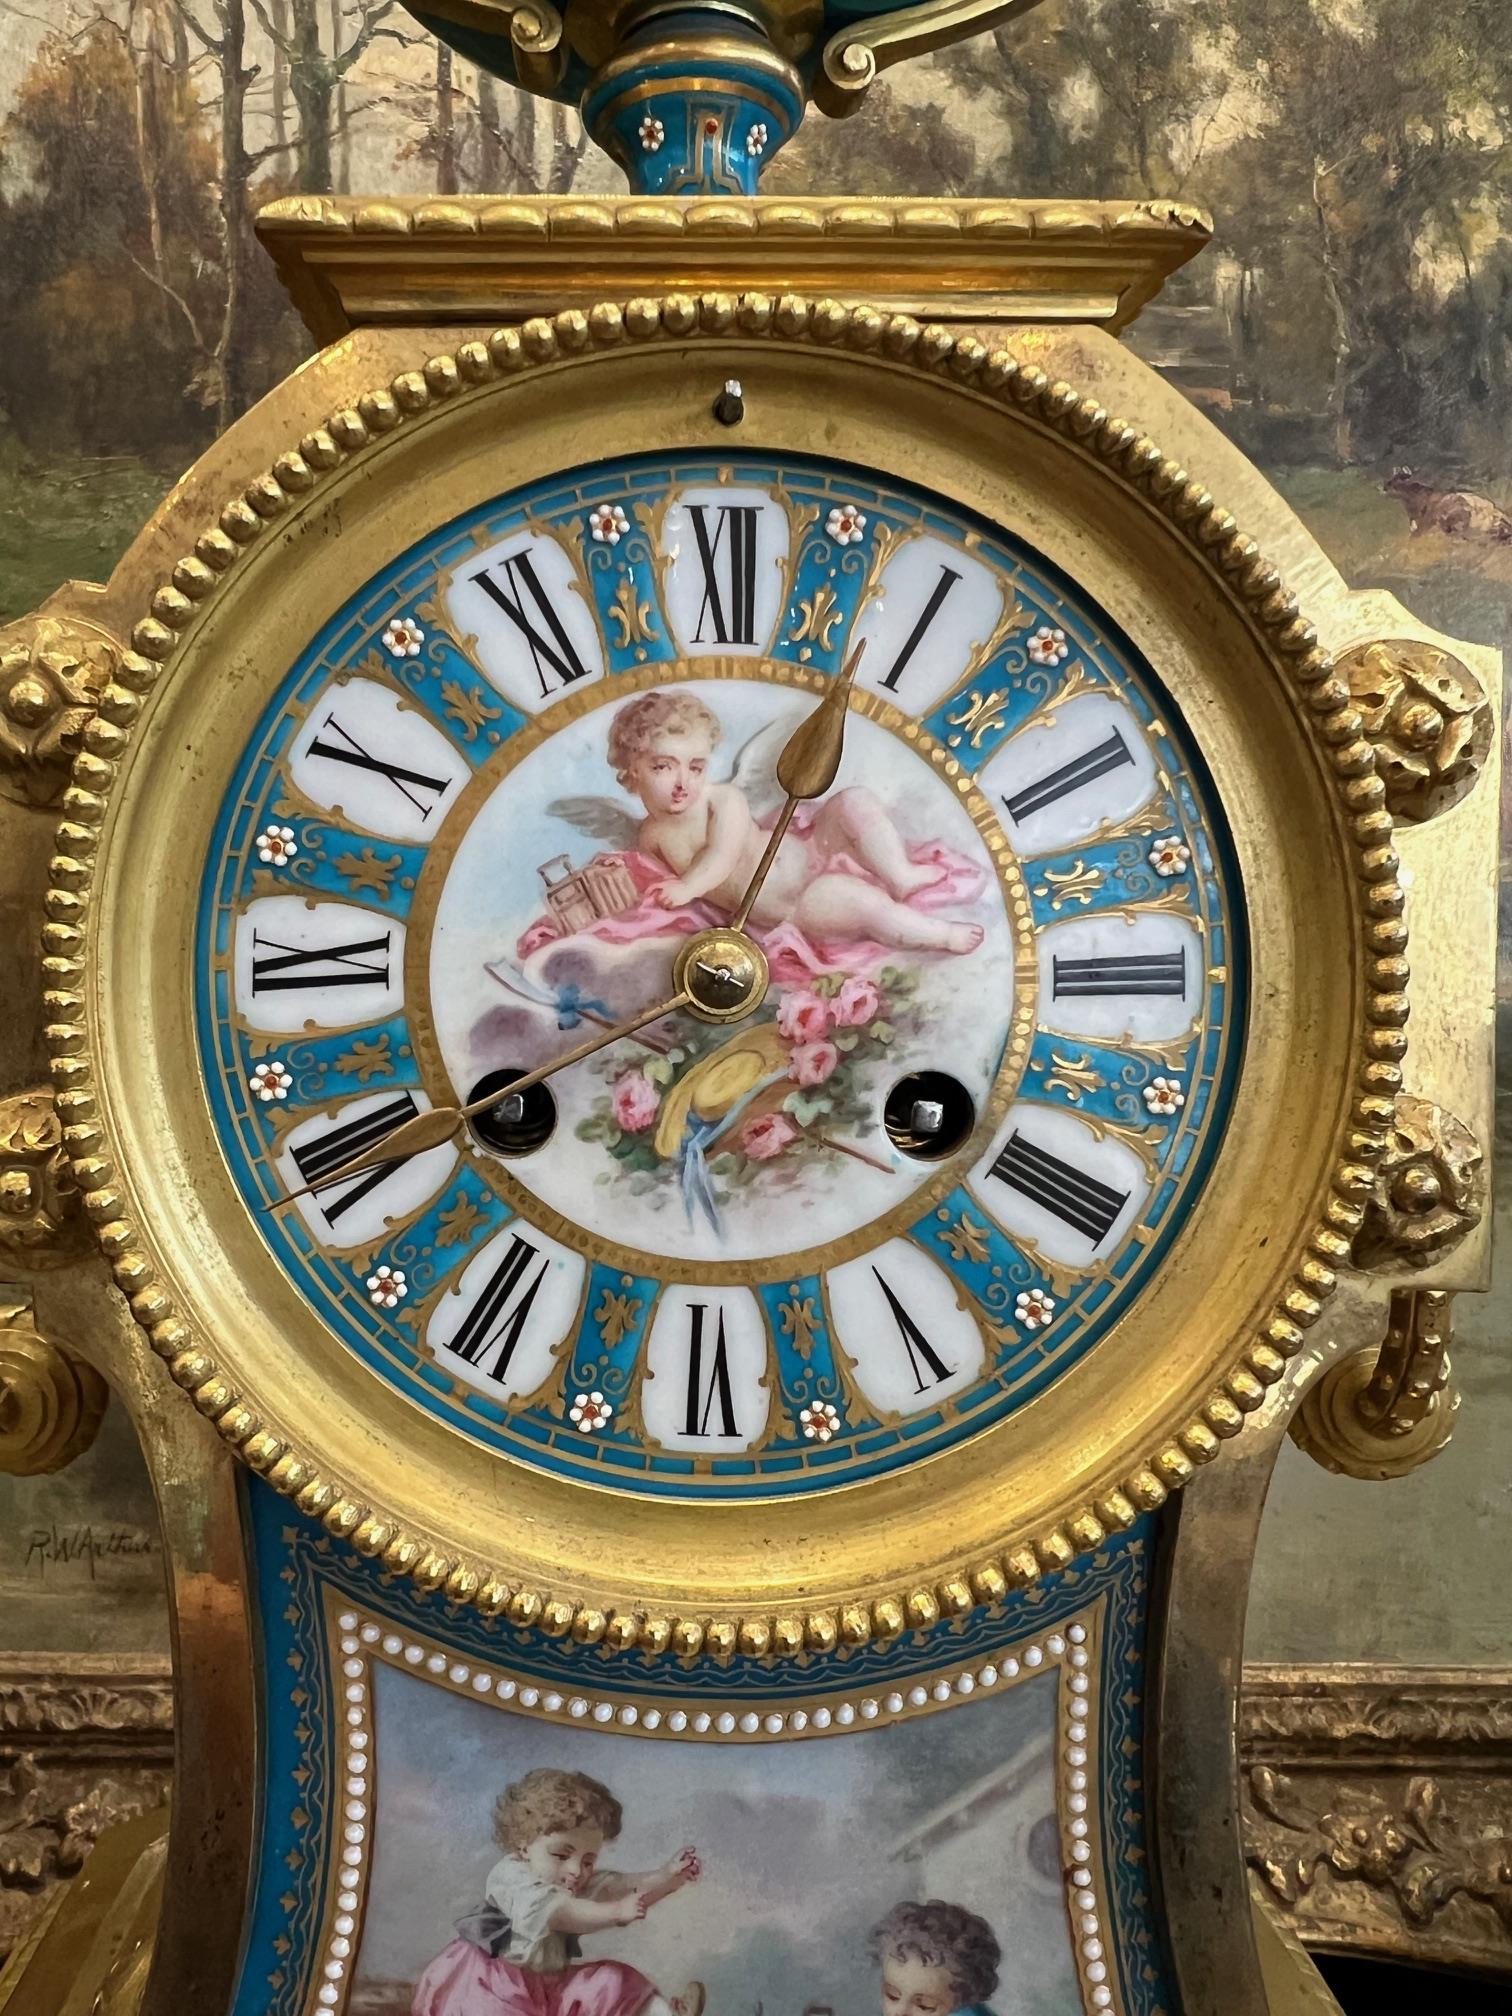 A FINE 19TH CENTURY PORCELAIN MANTEL CLOCK REPUTEDLY OWNED BY EMPRESS EUGENIE, WIFE OF NAPOLEON III - Image 6 of 8